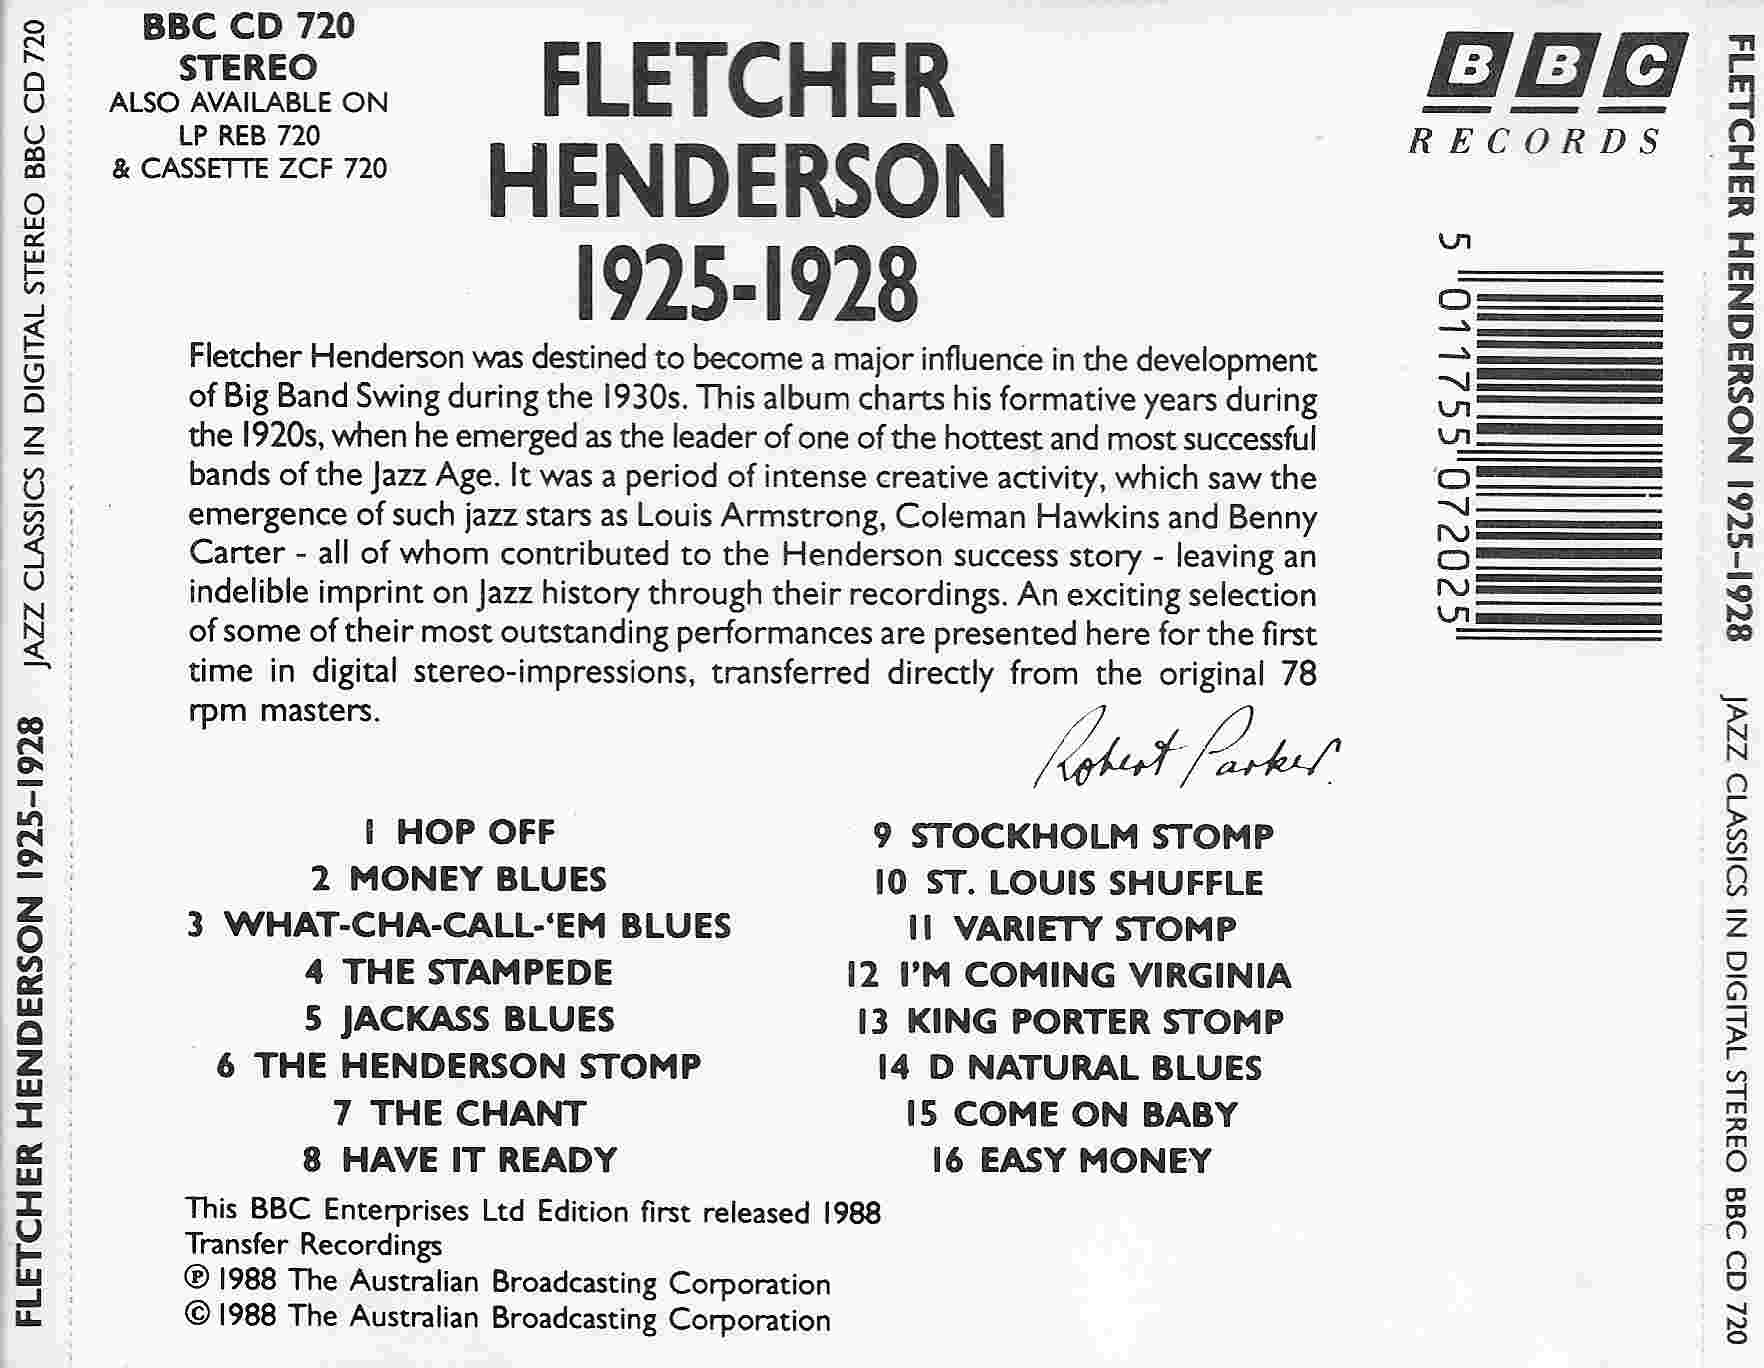 Picture of BBCCD720 Jazz classics - Fletcher Henderson 1925 - 1928 by artist Fletcher Henderson  from the BBC records and Tapes library